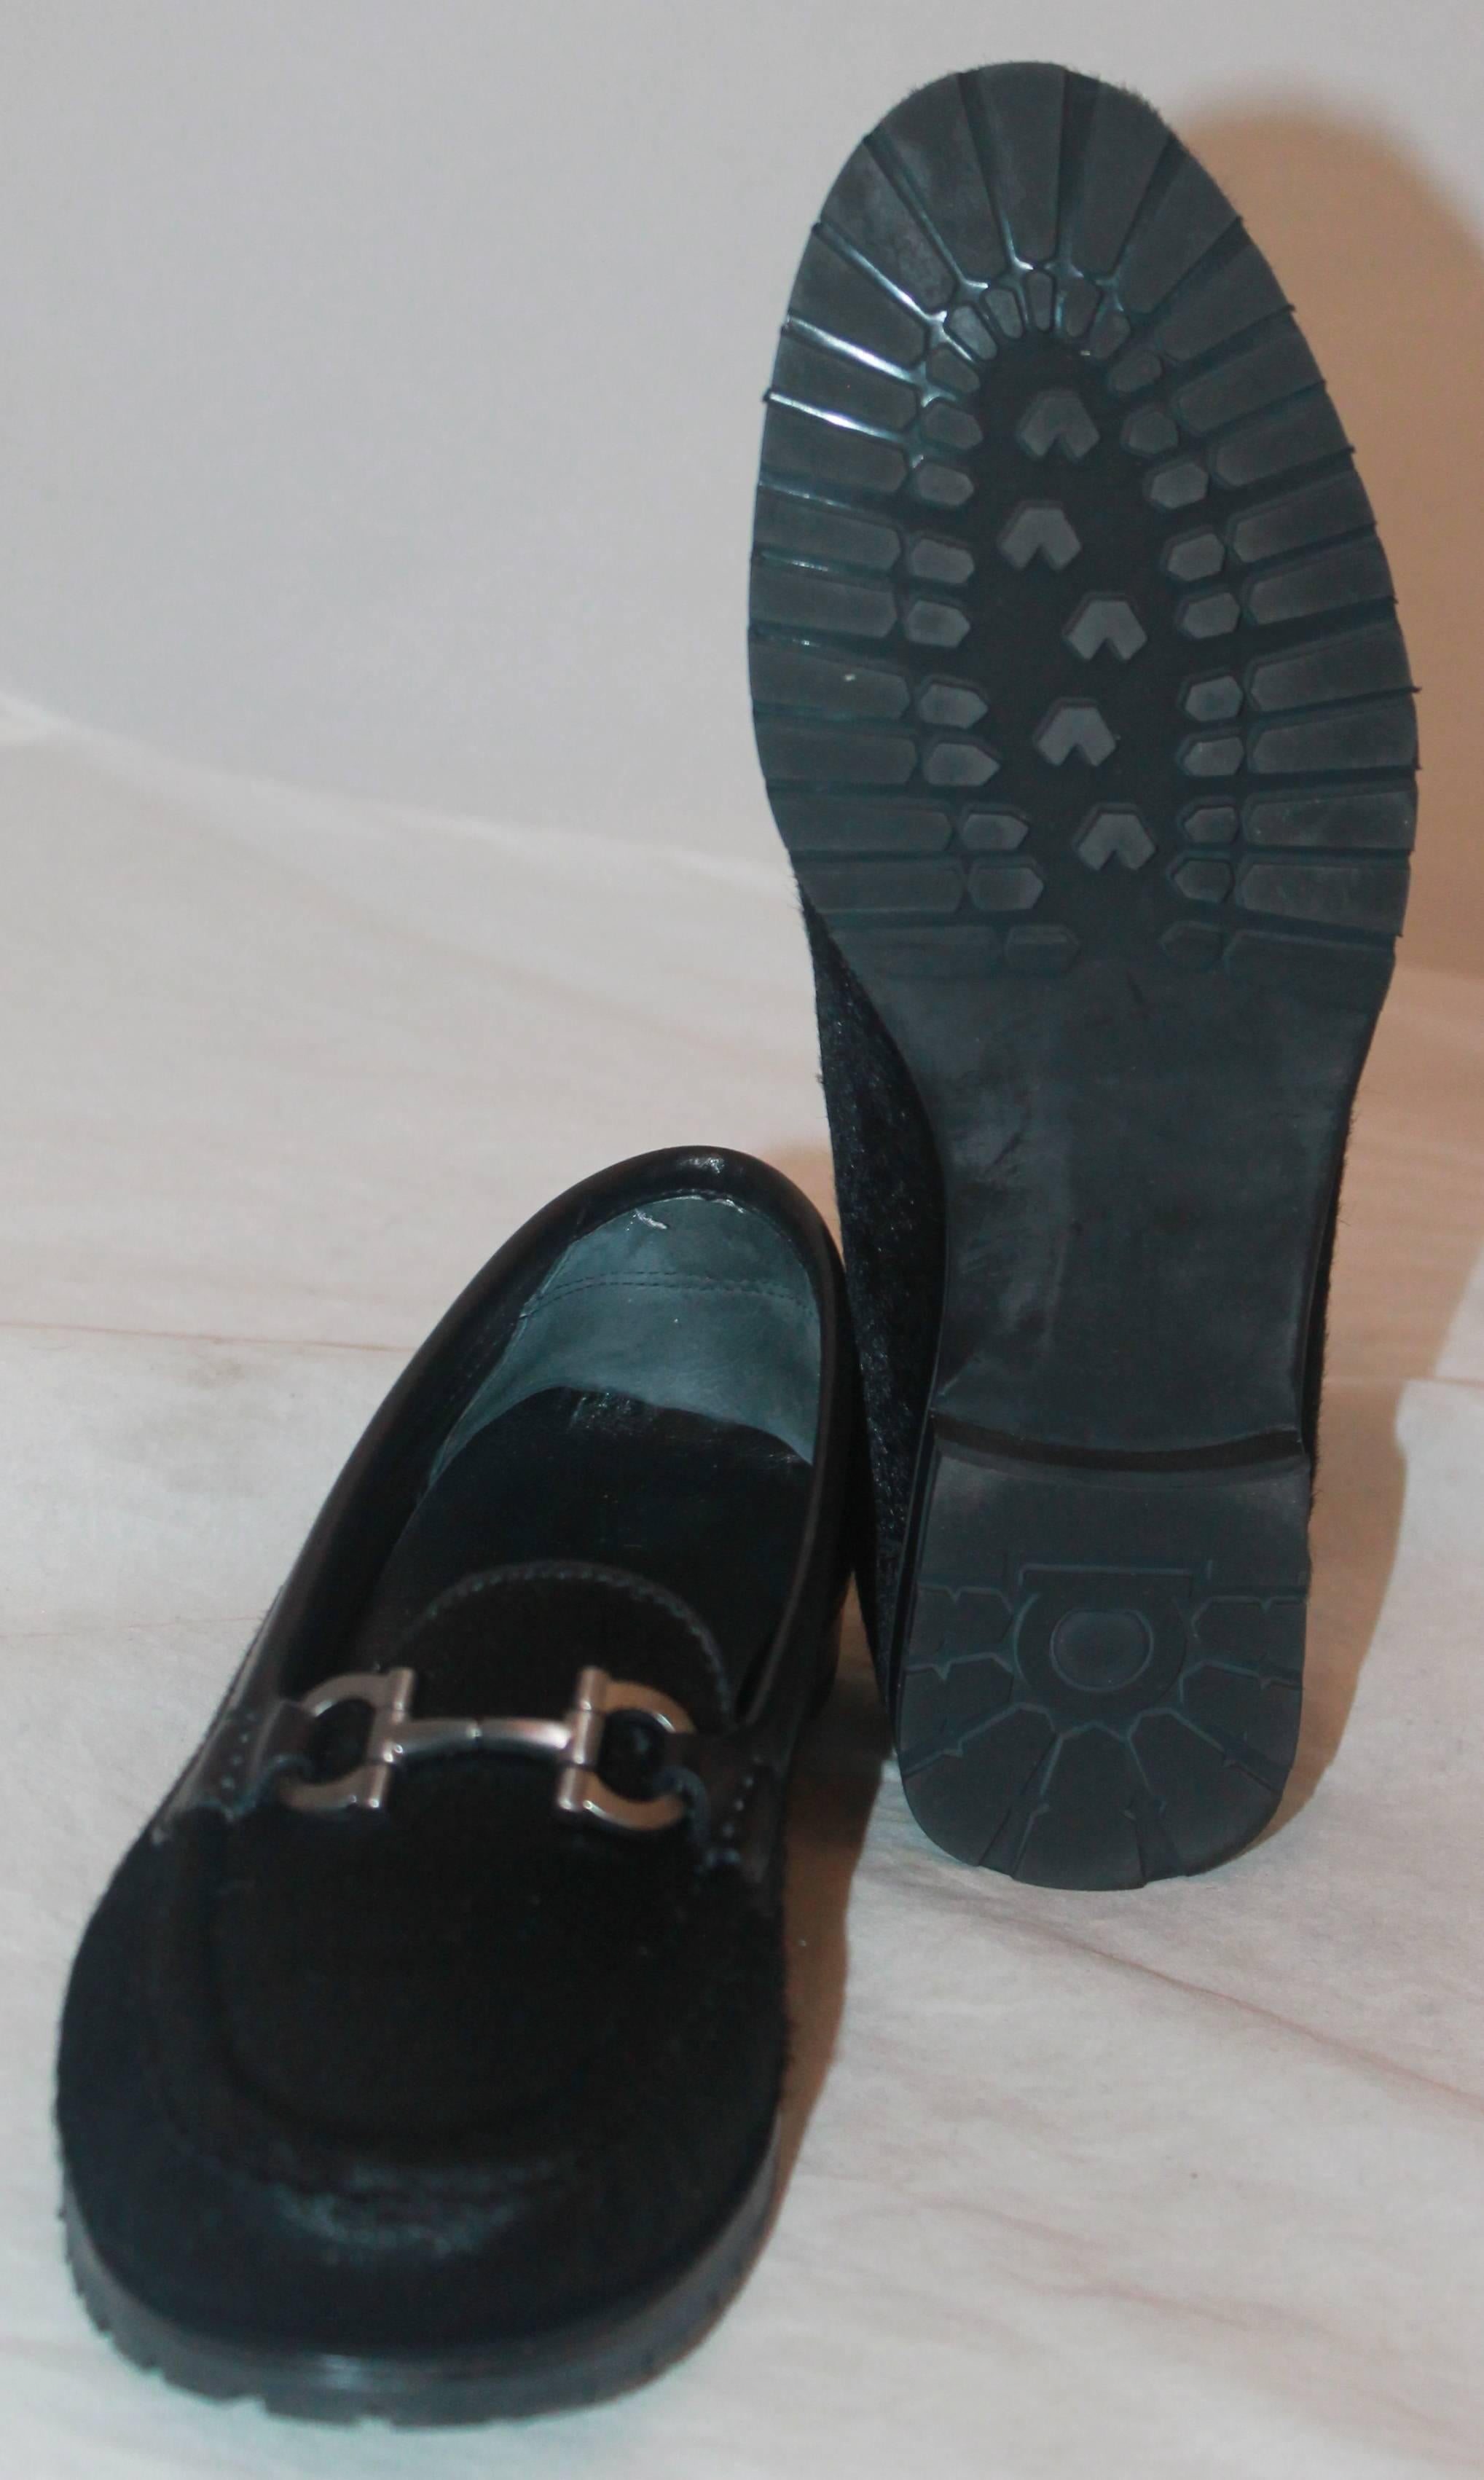 black and silver loafers